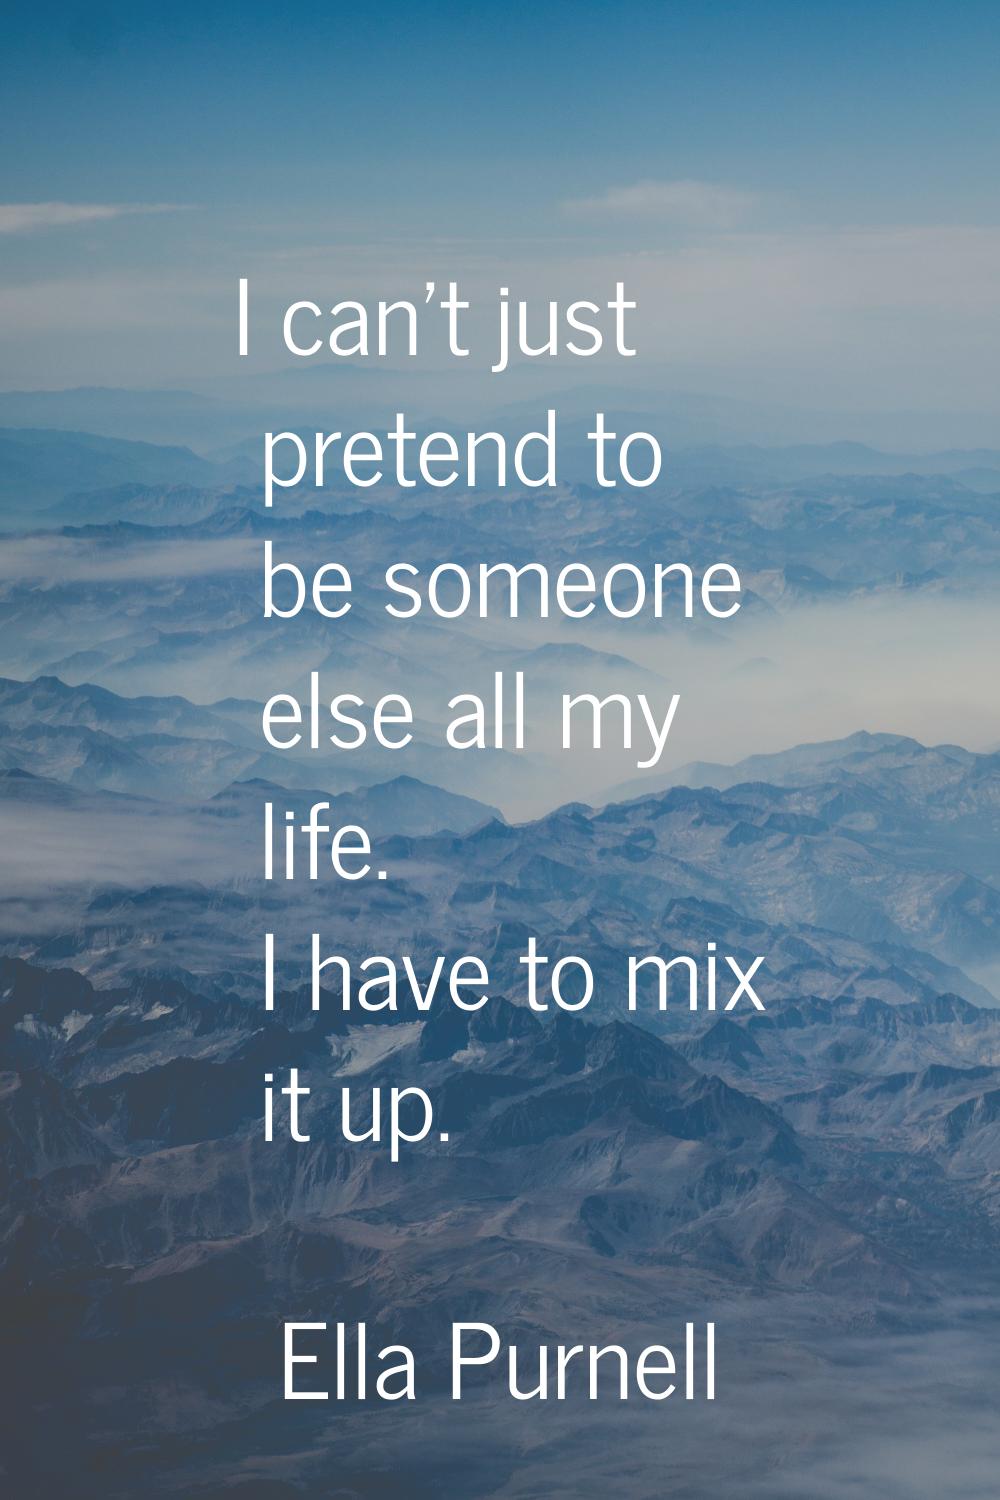 I can't just pretend to be someone else all my life. I have to mix it up.